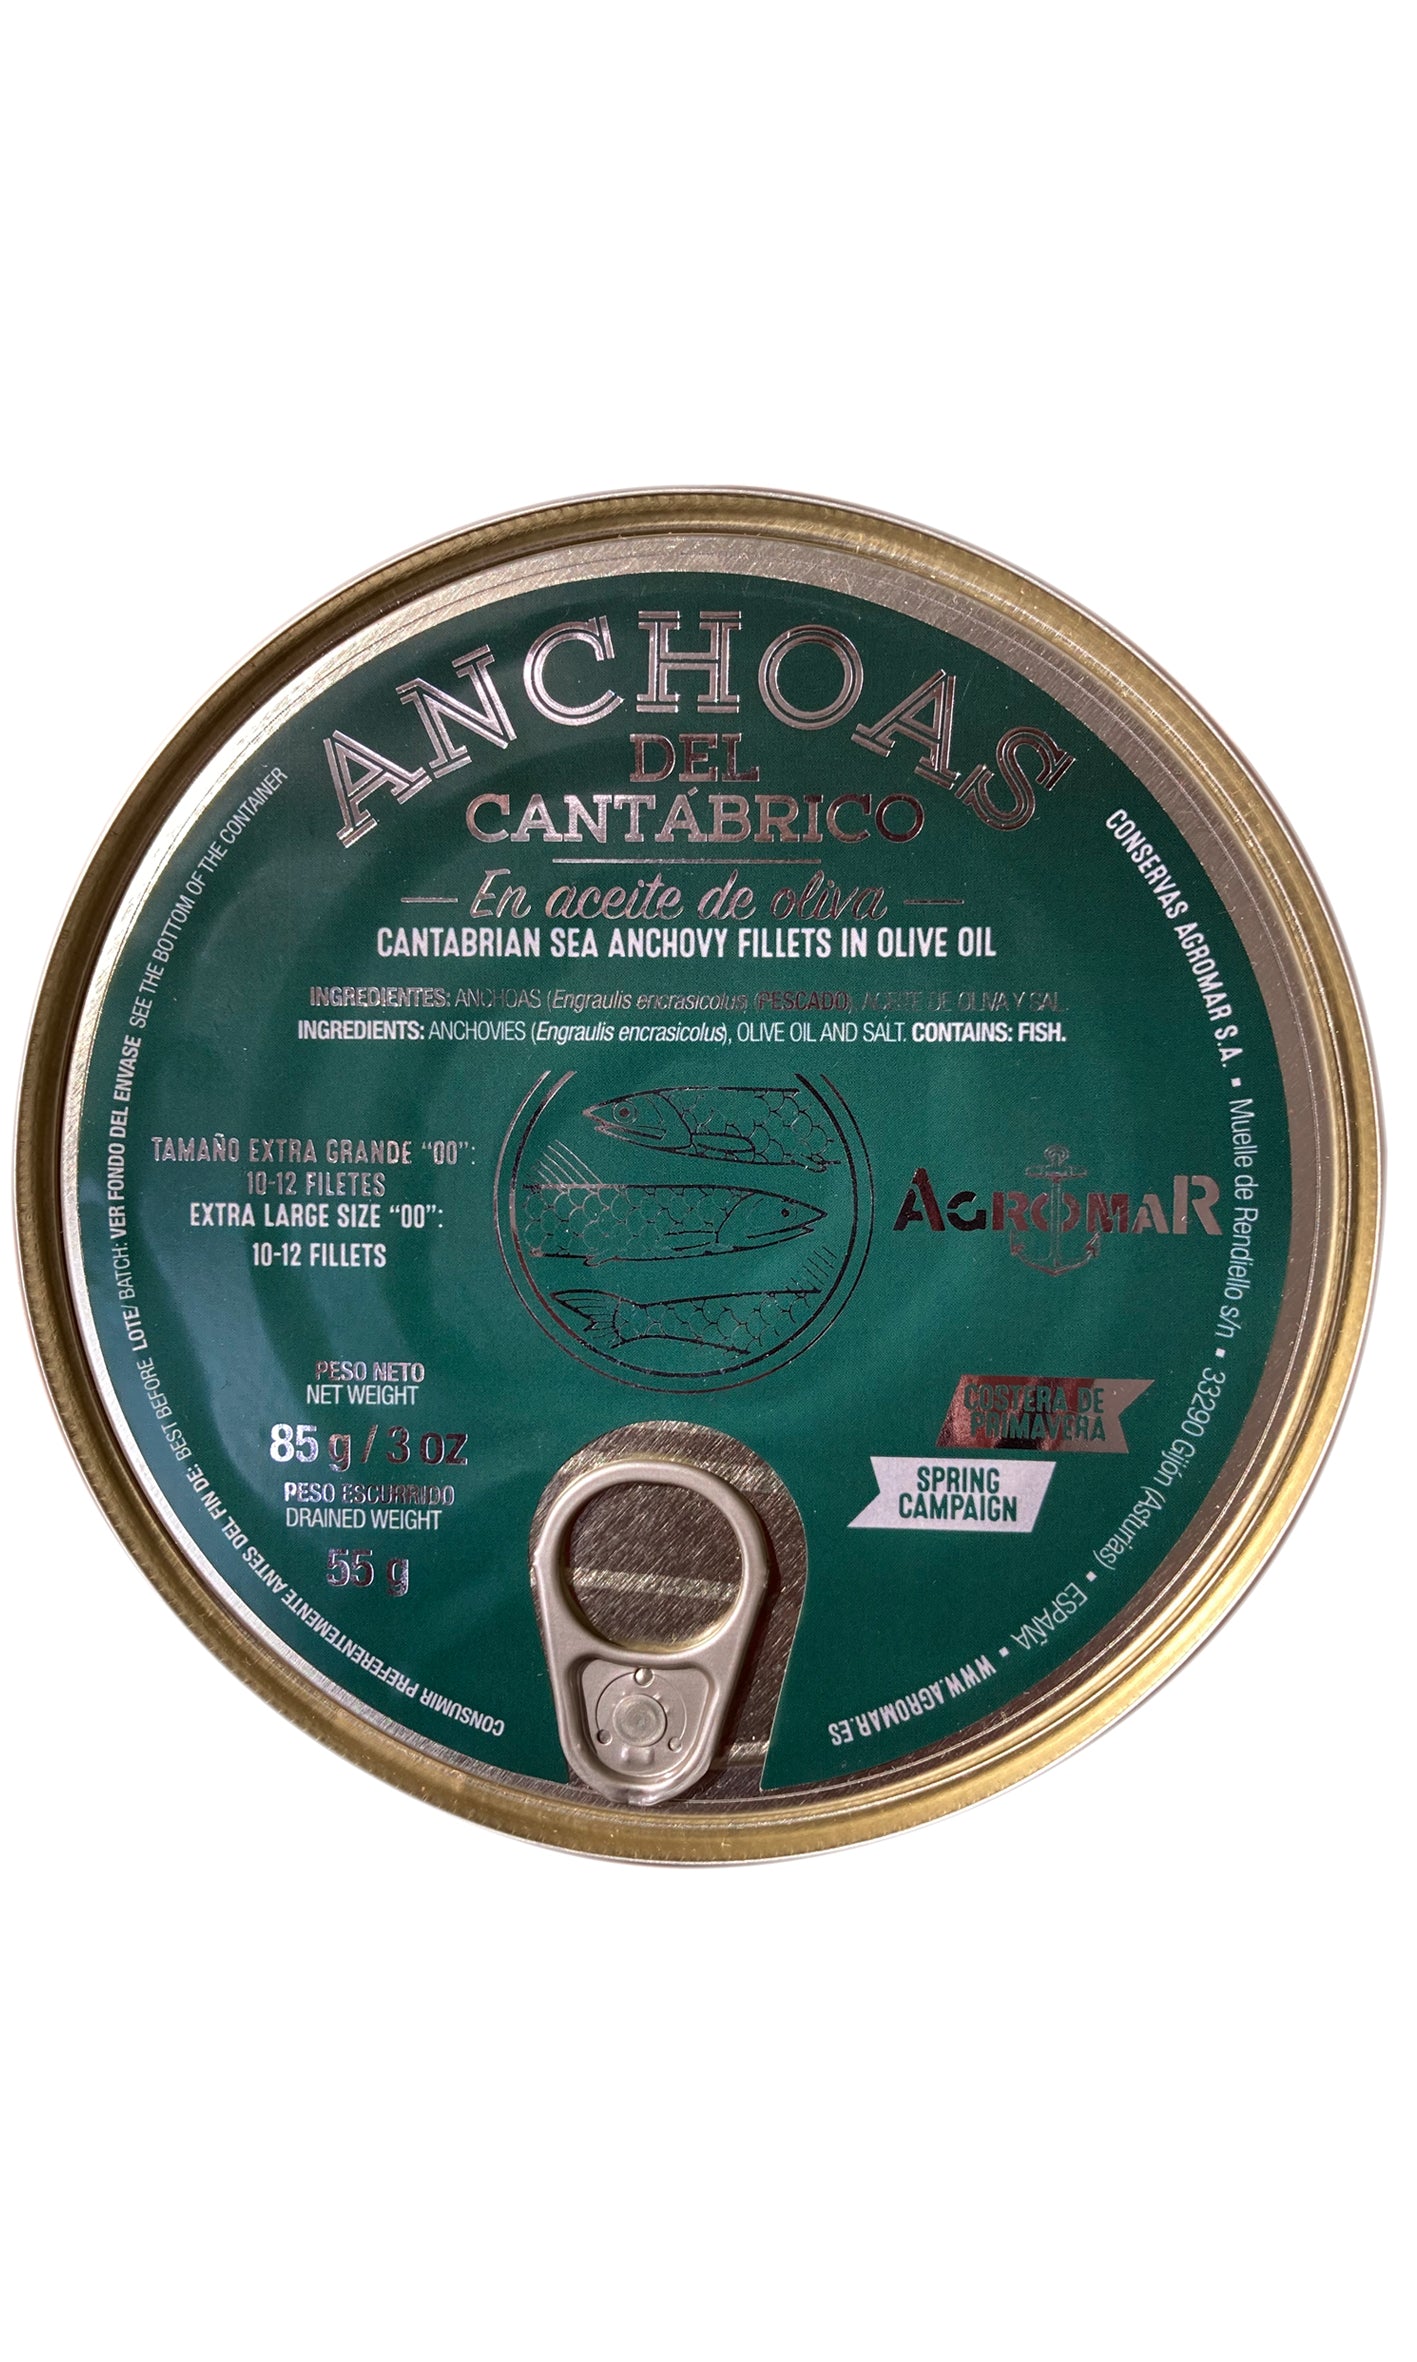 Agromar - XL "00" Cantabrian Anchovy Fillets in Olive Oil - 100g